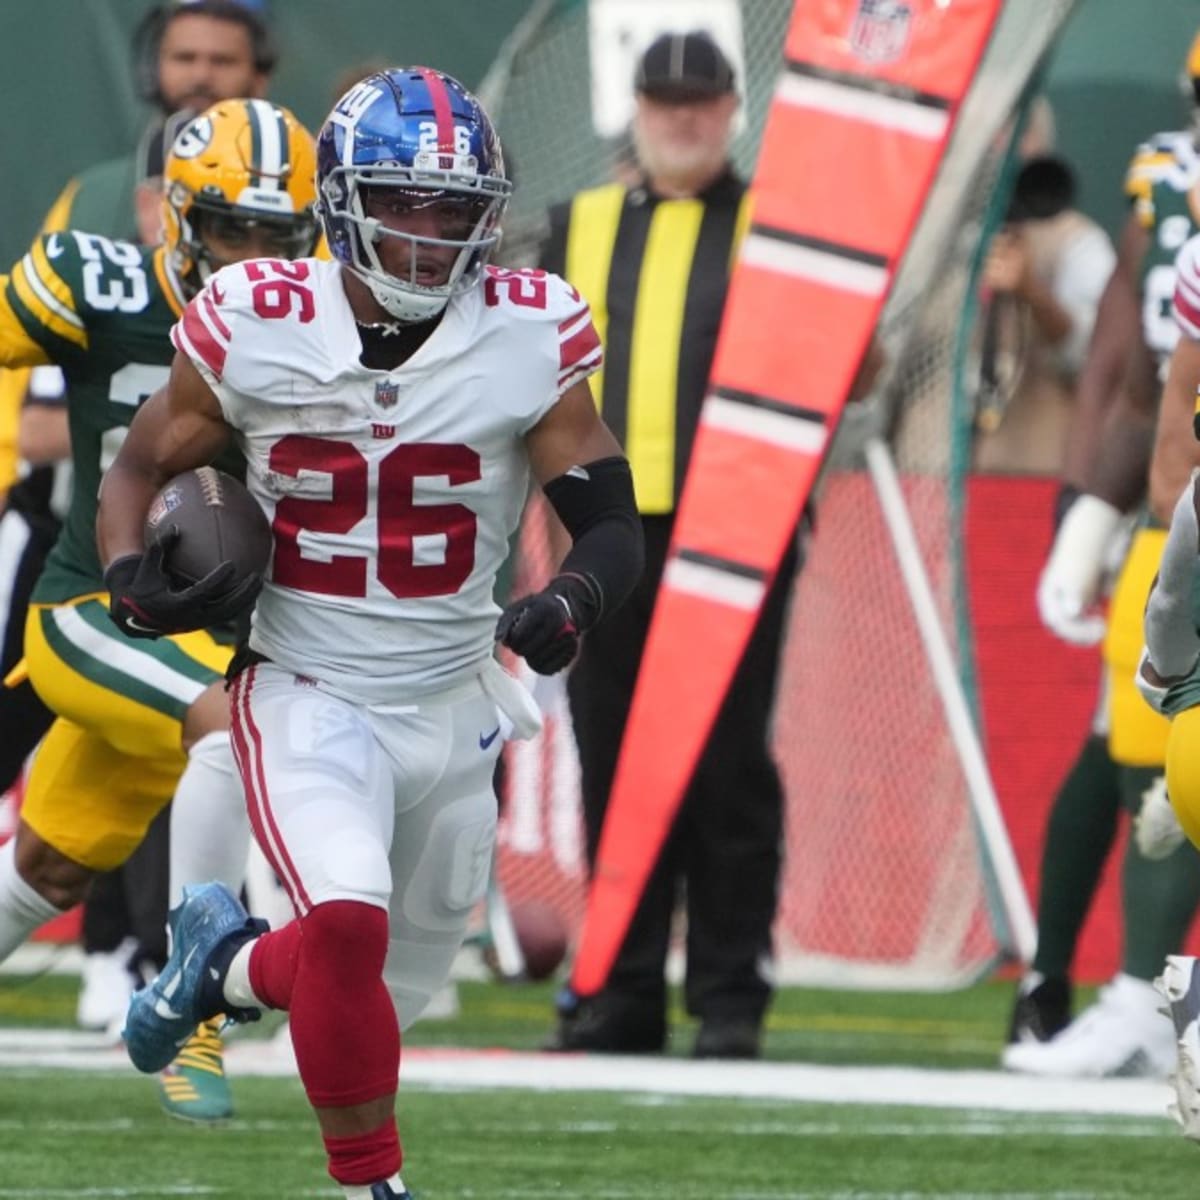 What we learned from New York Giants' 27-22 win over Green Bay Packers